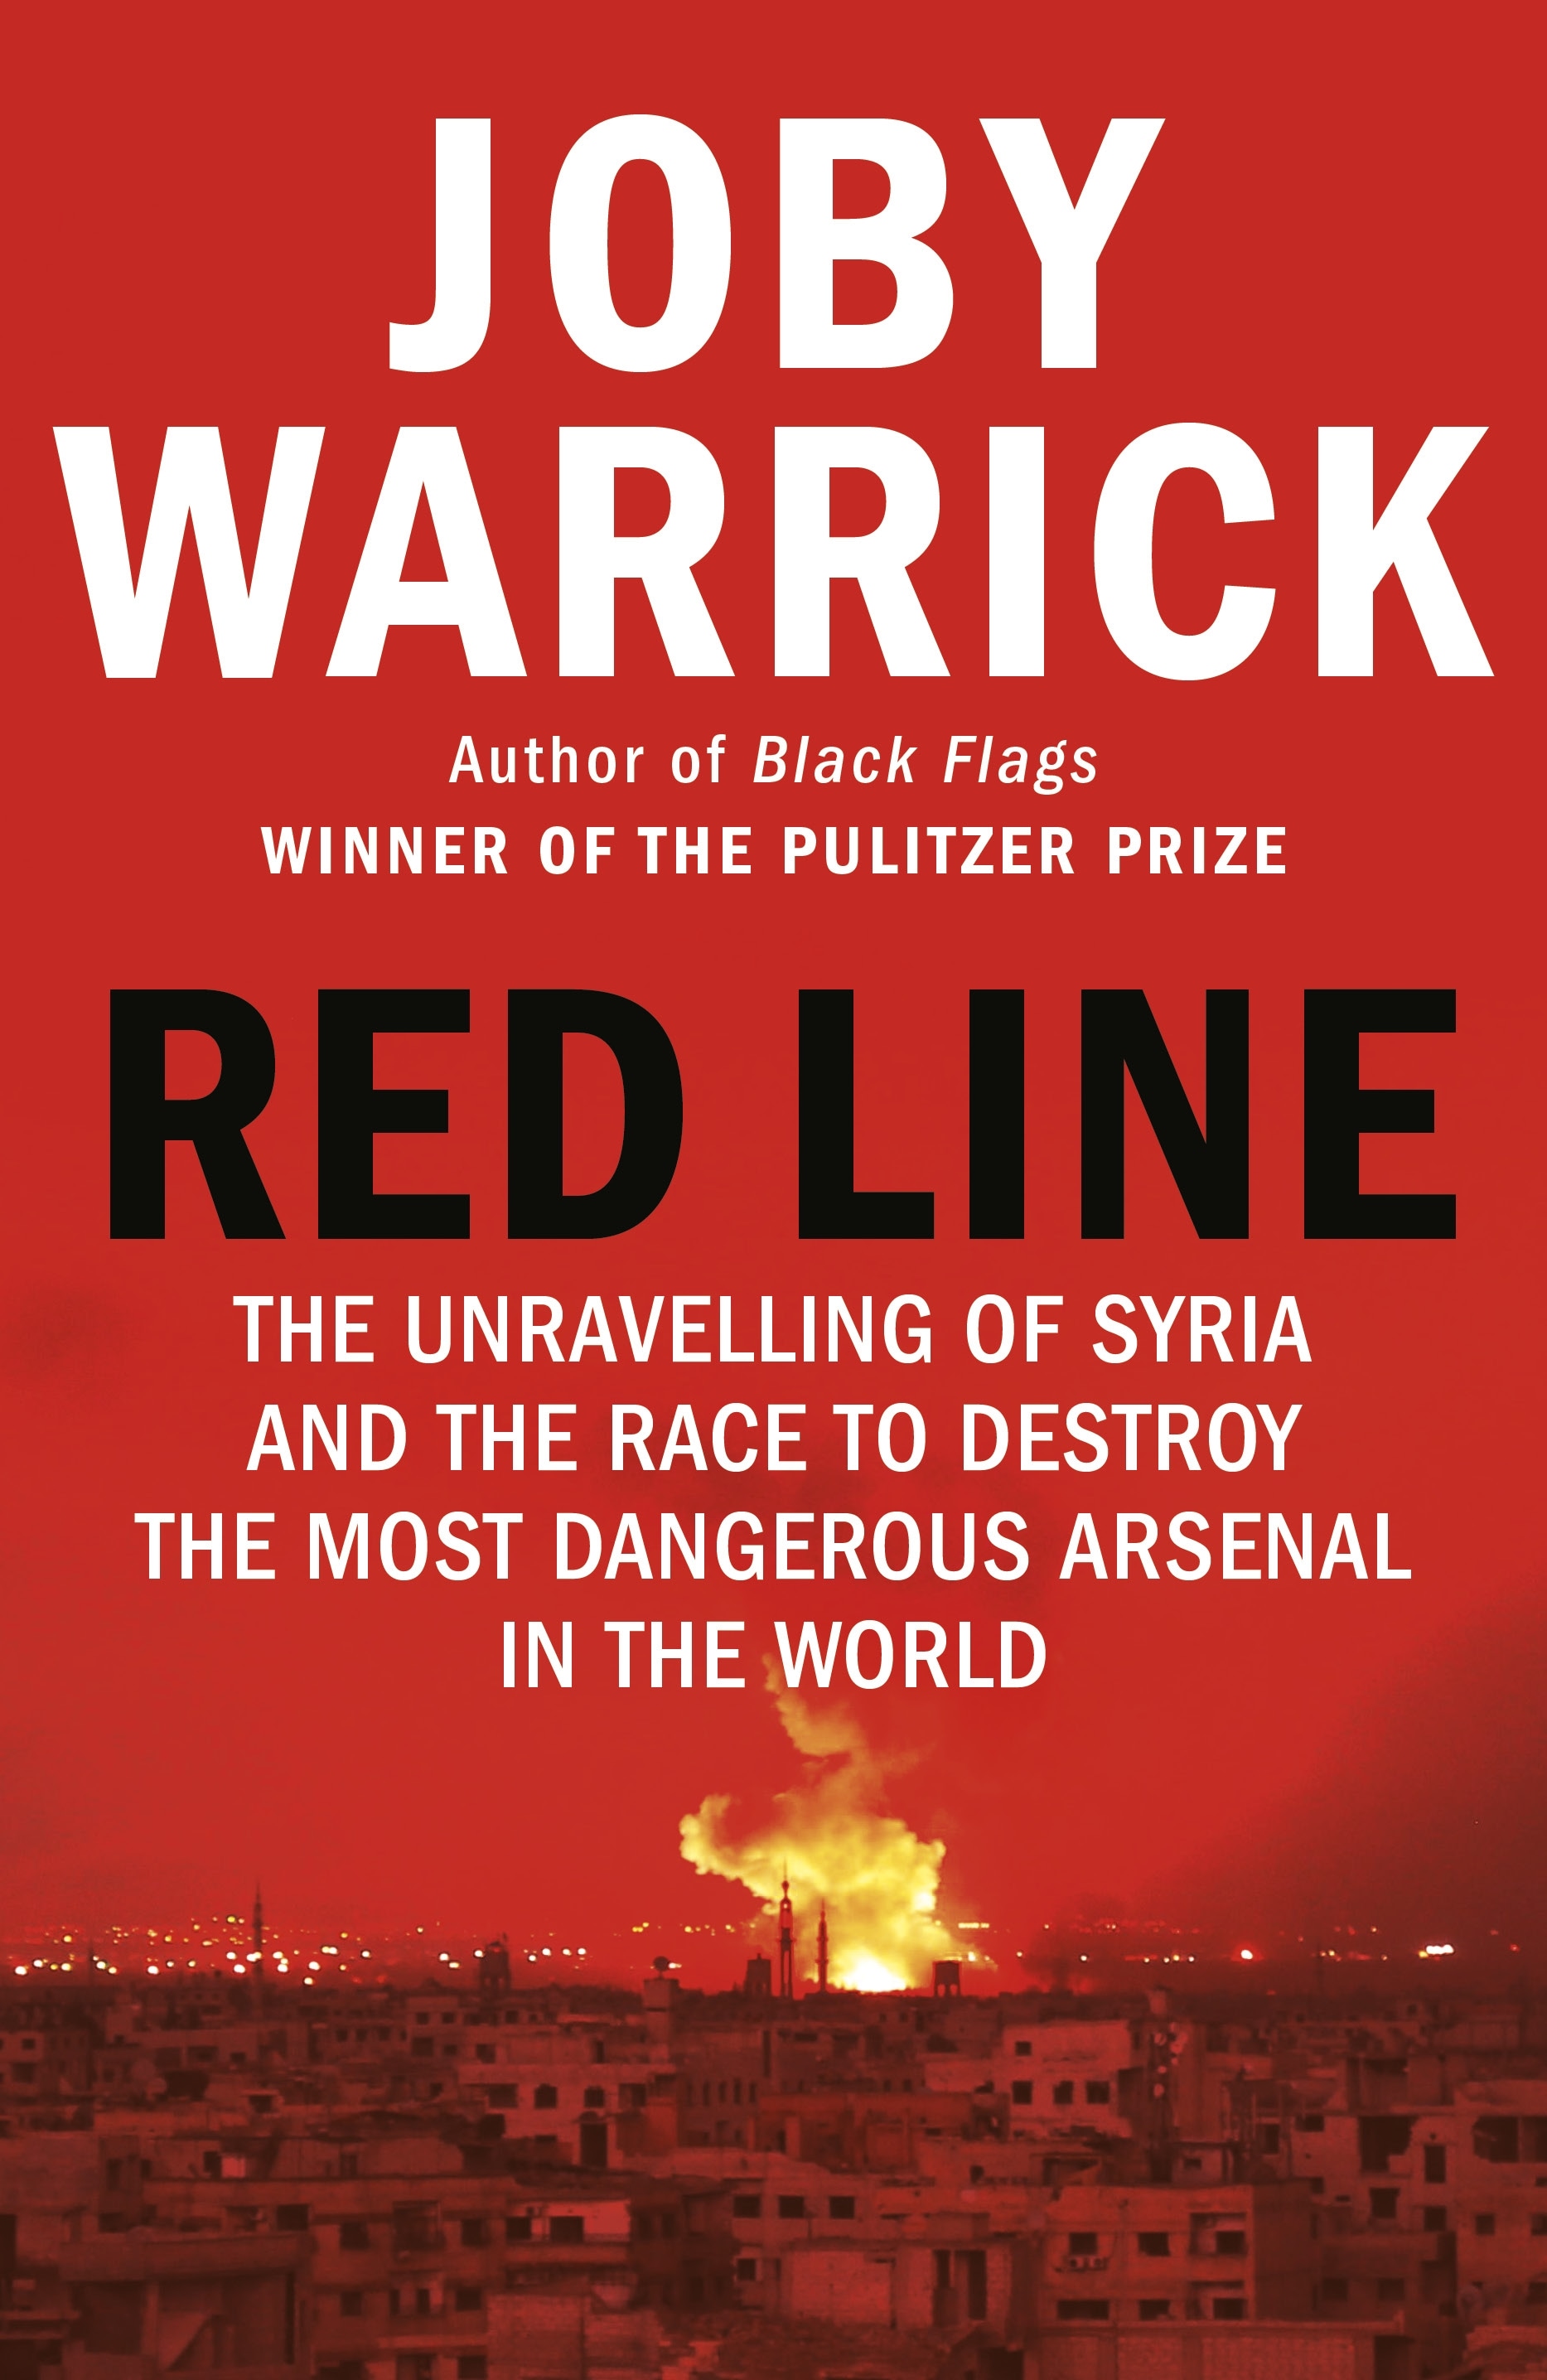 Book “Red Line” by Joby Warrick — February 25, 2021